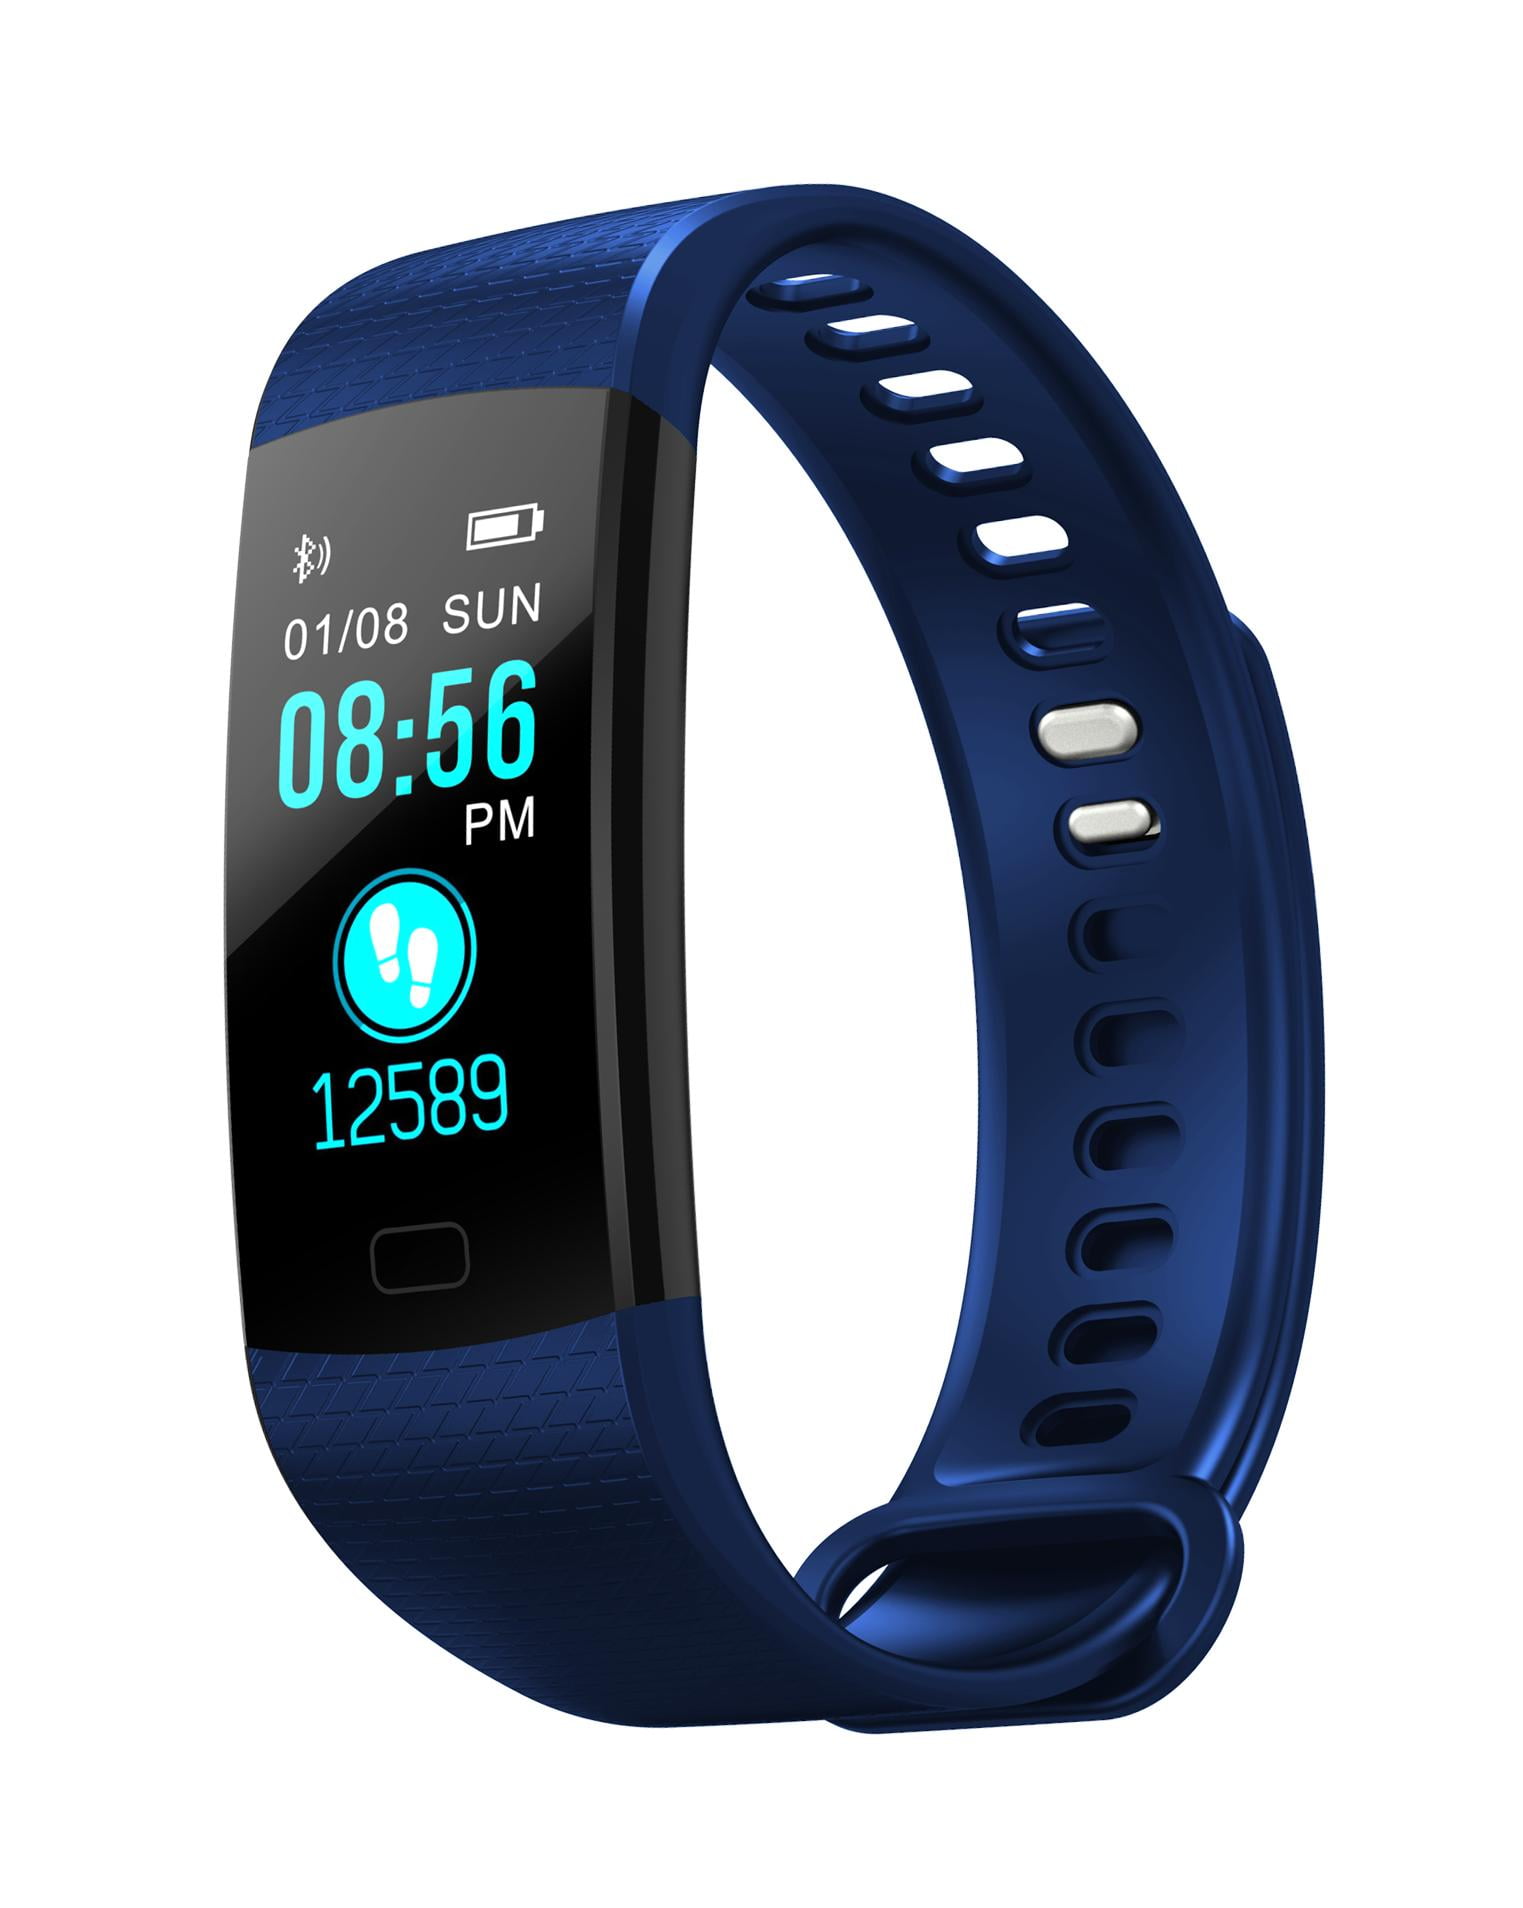 Schaken Atlantische Oceaan idee Fitness Tracker HR, fitness tracker with blood pressure monitor, Smart  Fitness Band with Step Counter, Calorie Counter, Pedometer color screen  (BLUE) - Walmart.com